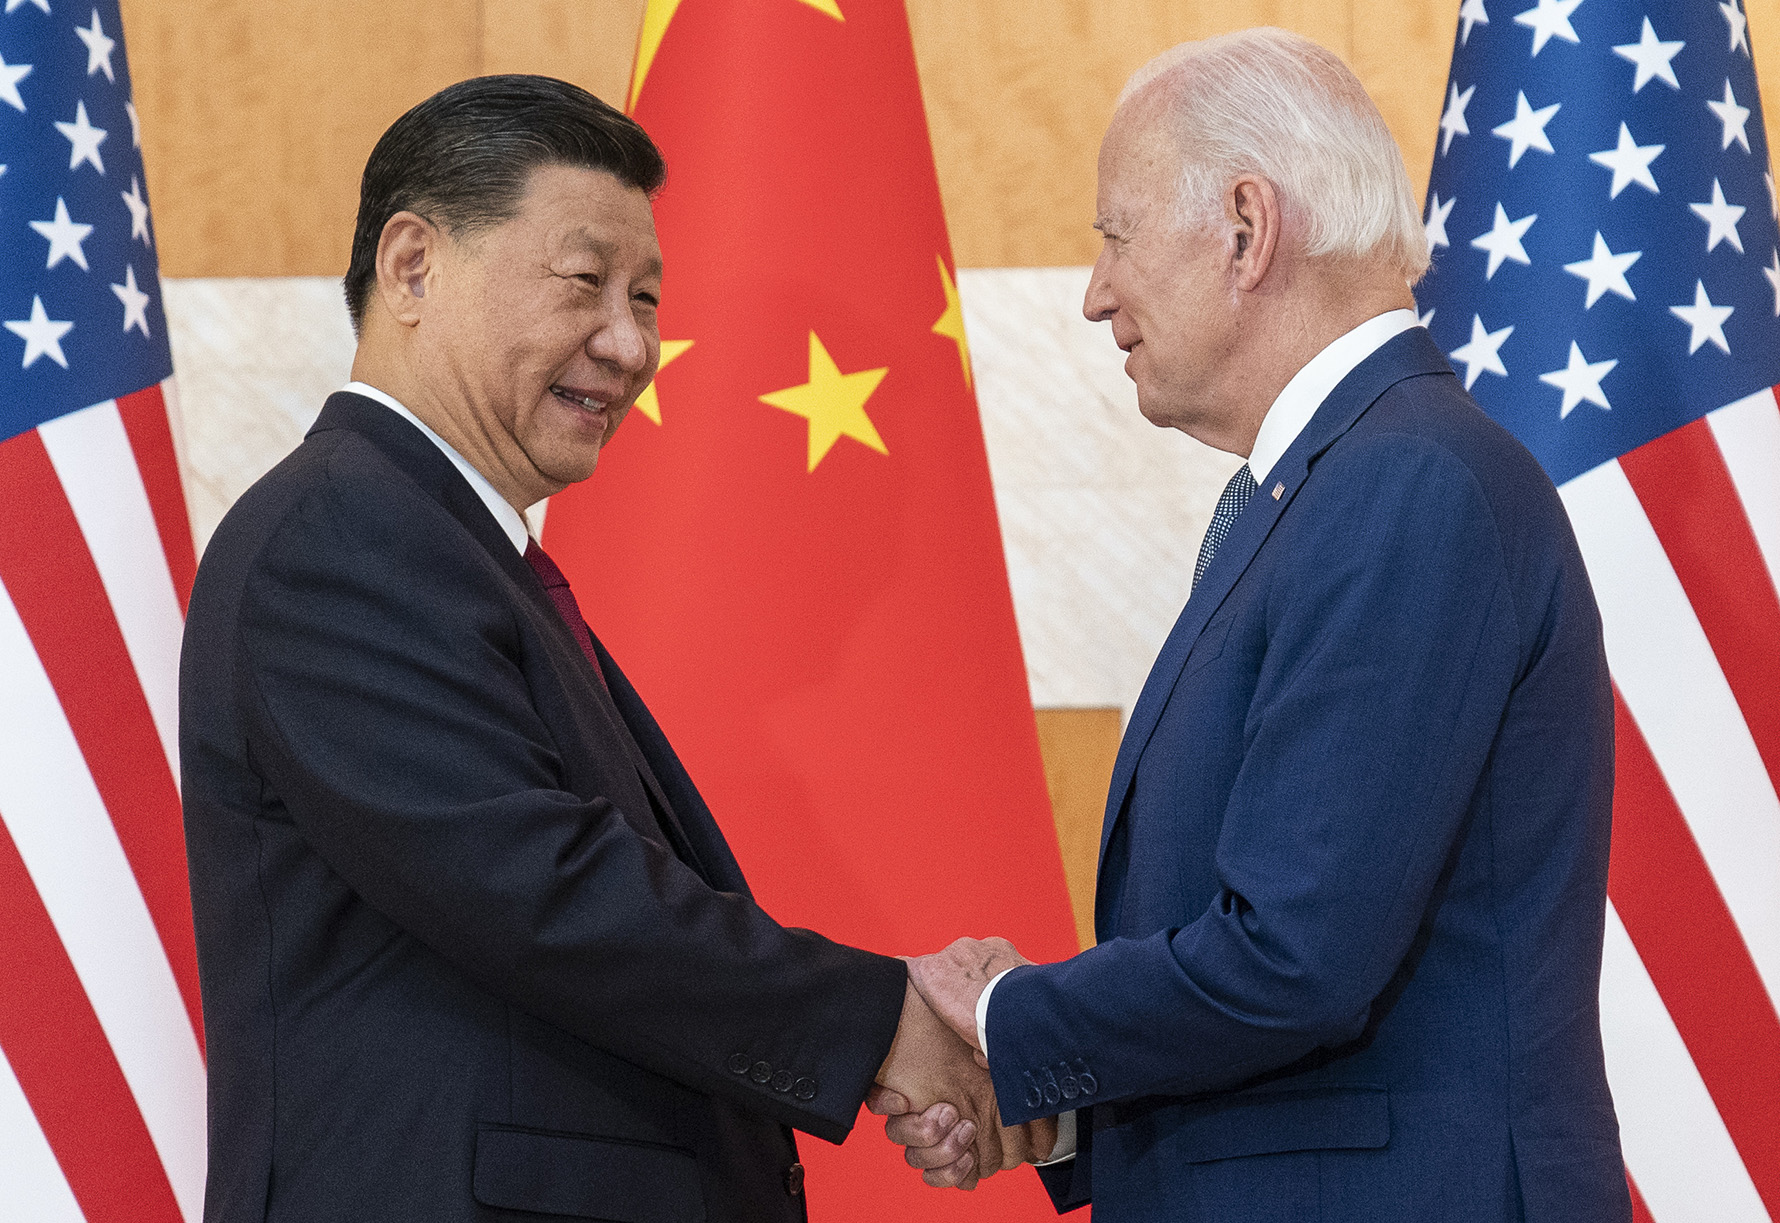 U.S. President Joe Biden, right, and Chinese President Xi Jinping shake hands before a meeting on the sidelines of the G20 summit meeting, on November 14, in Bali, Indonesia.